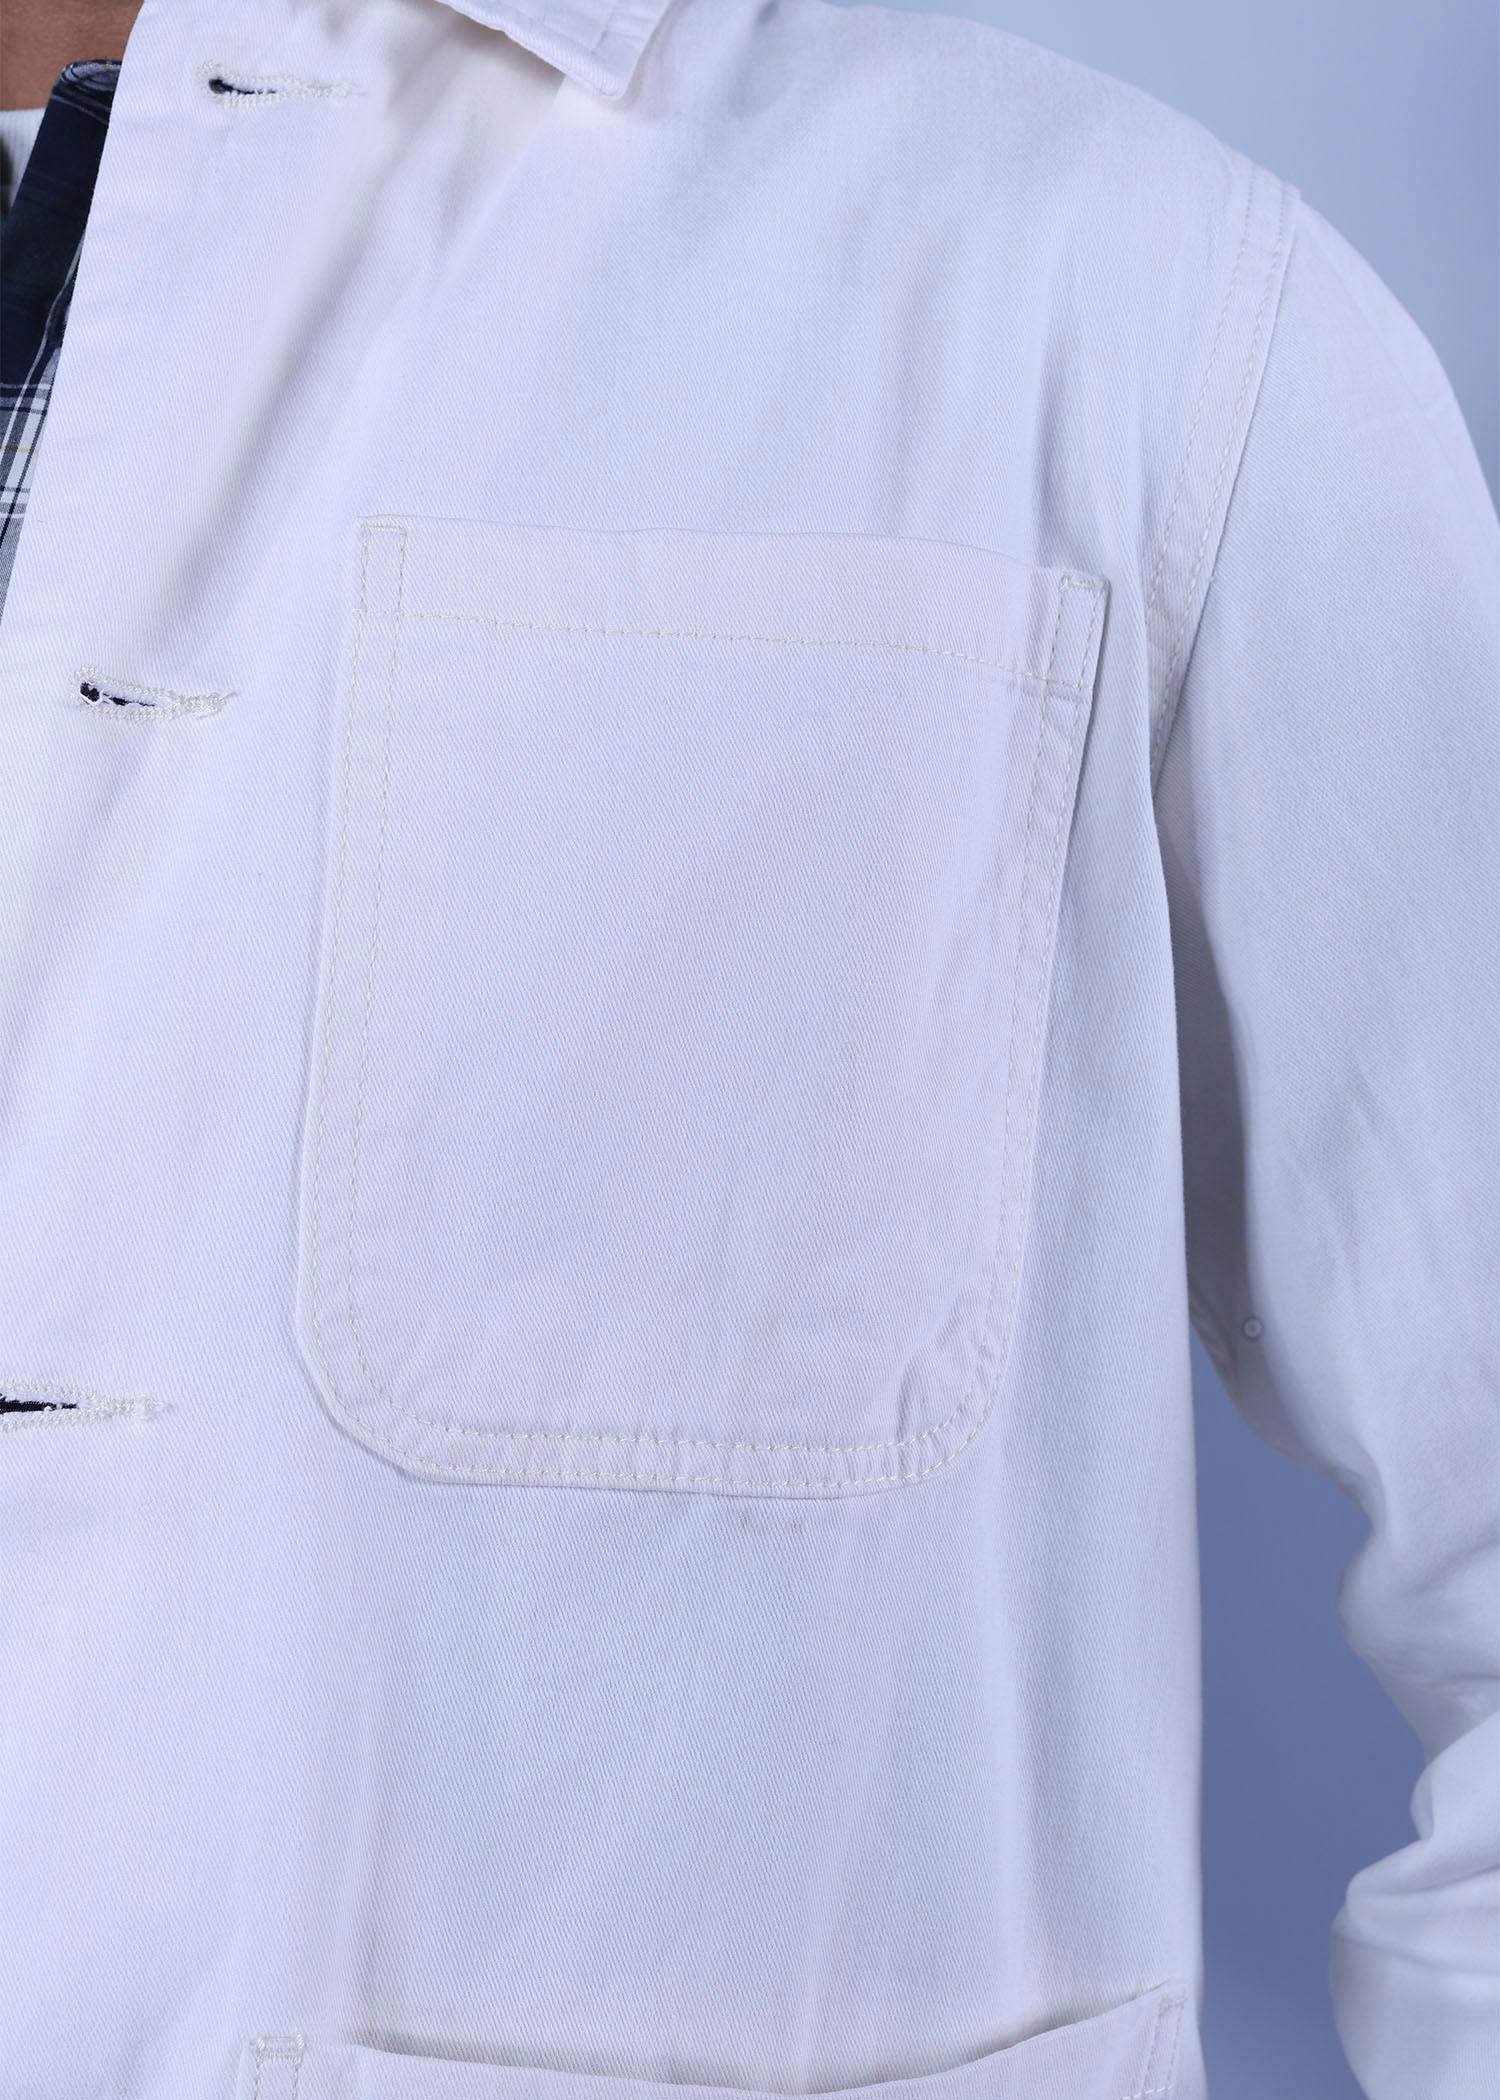 jay iv over shirt white color close front view